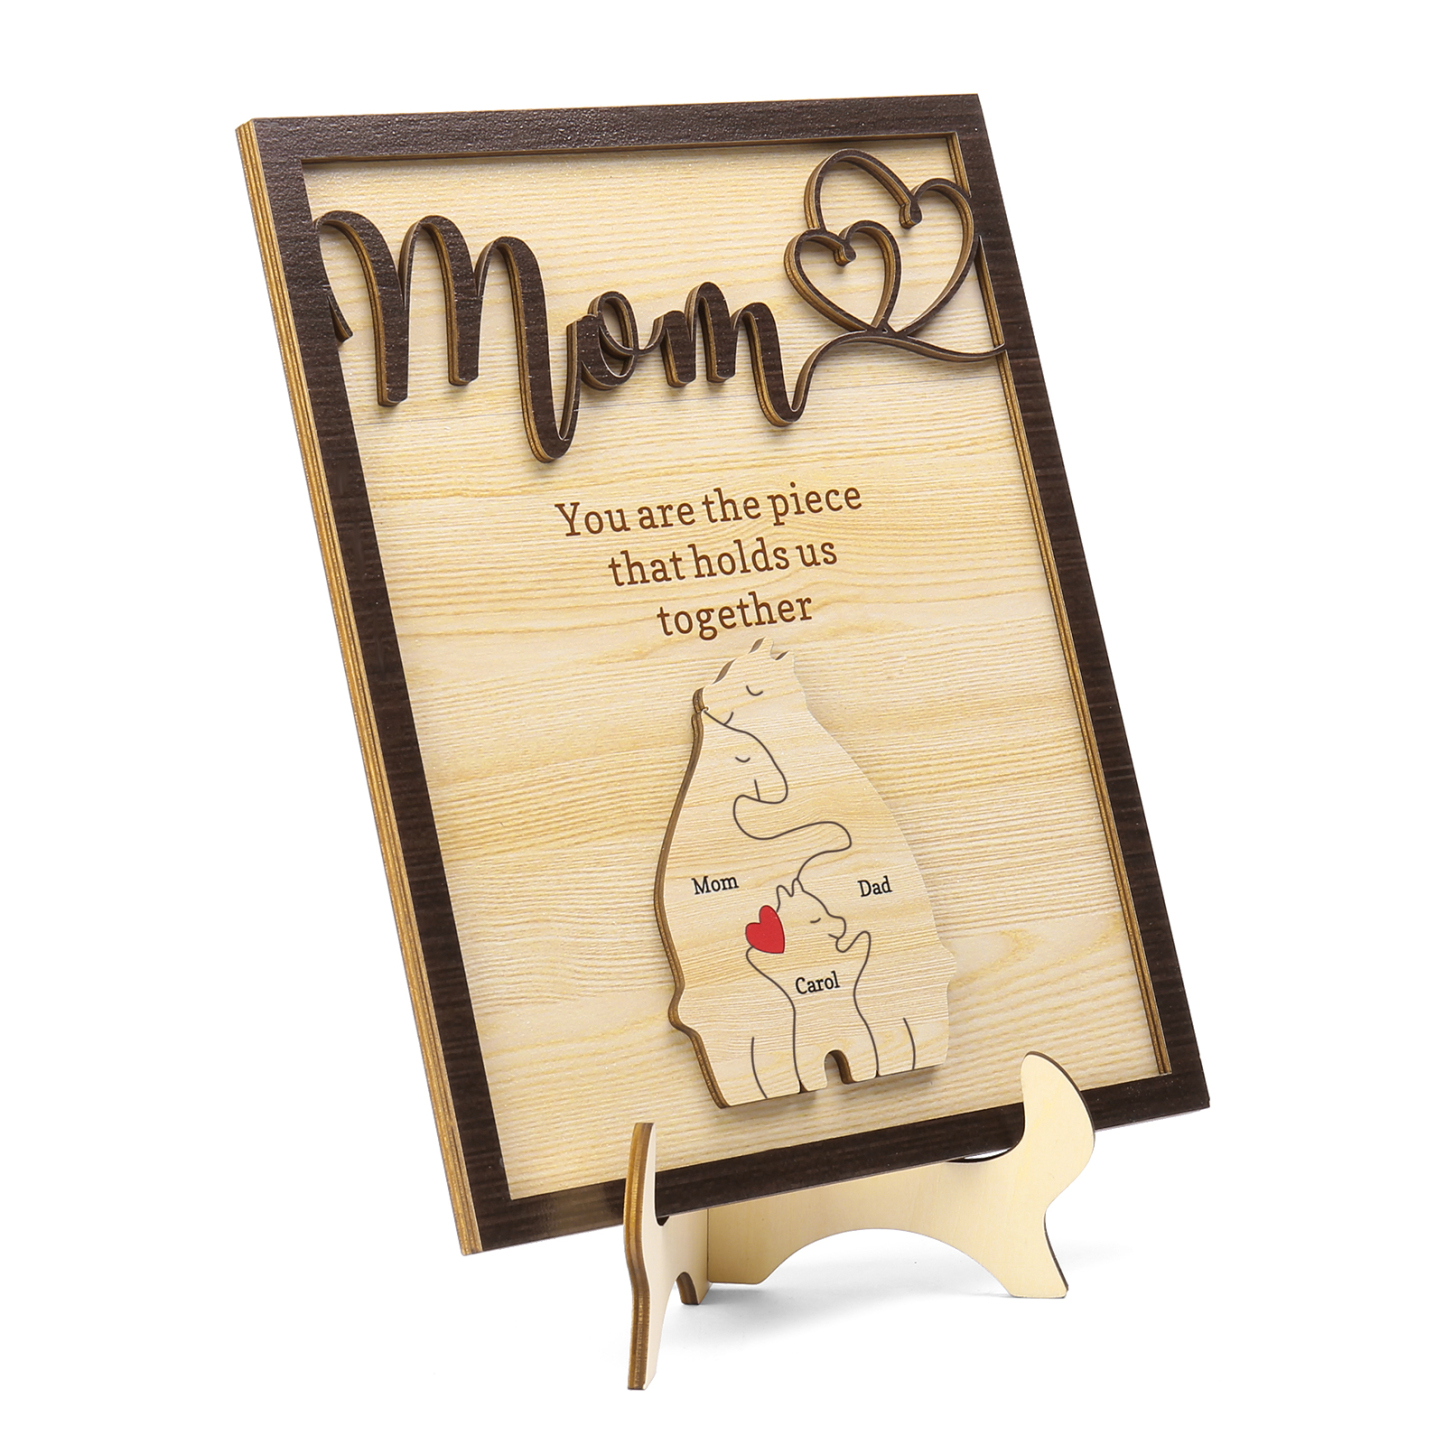 3 Names - Personalized Home Frame Wooden Ornaments Cute Bear Style Ornaments for Mom